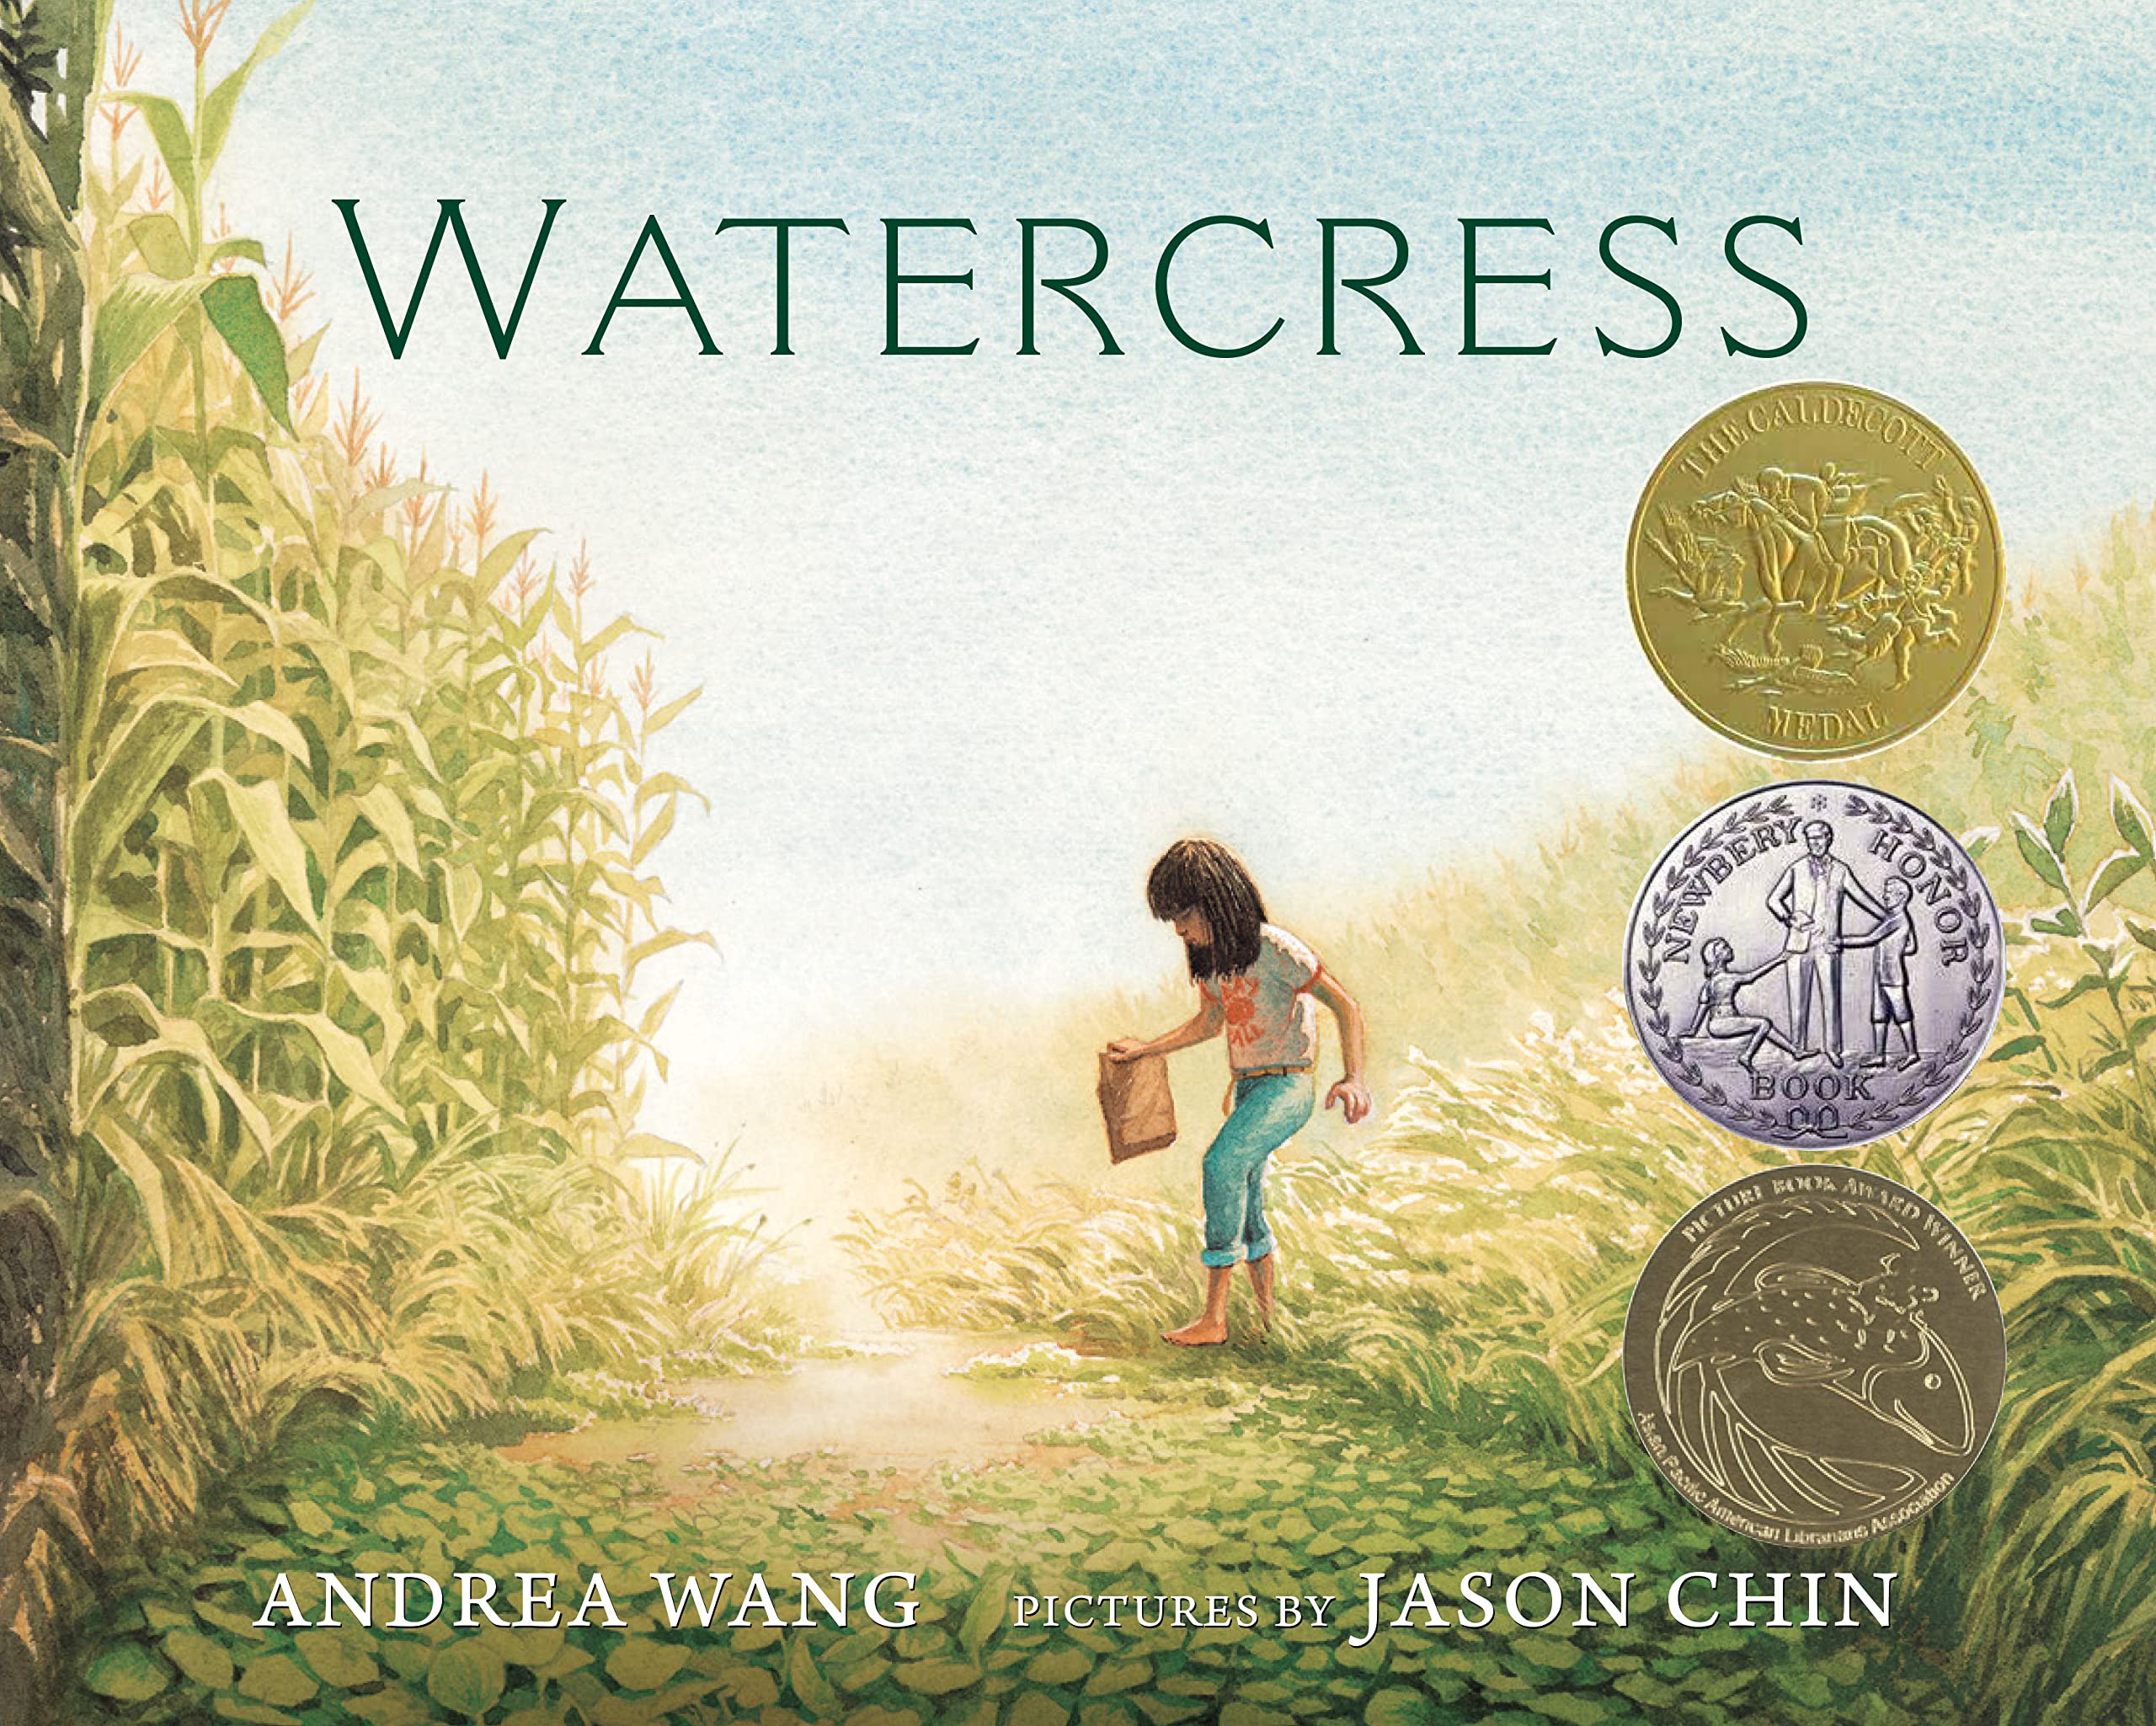 cover of the children's book "Watercress" by Andrea Wang with pictures by Jason Chin